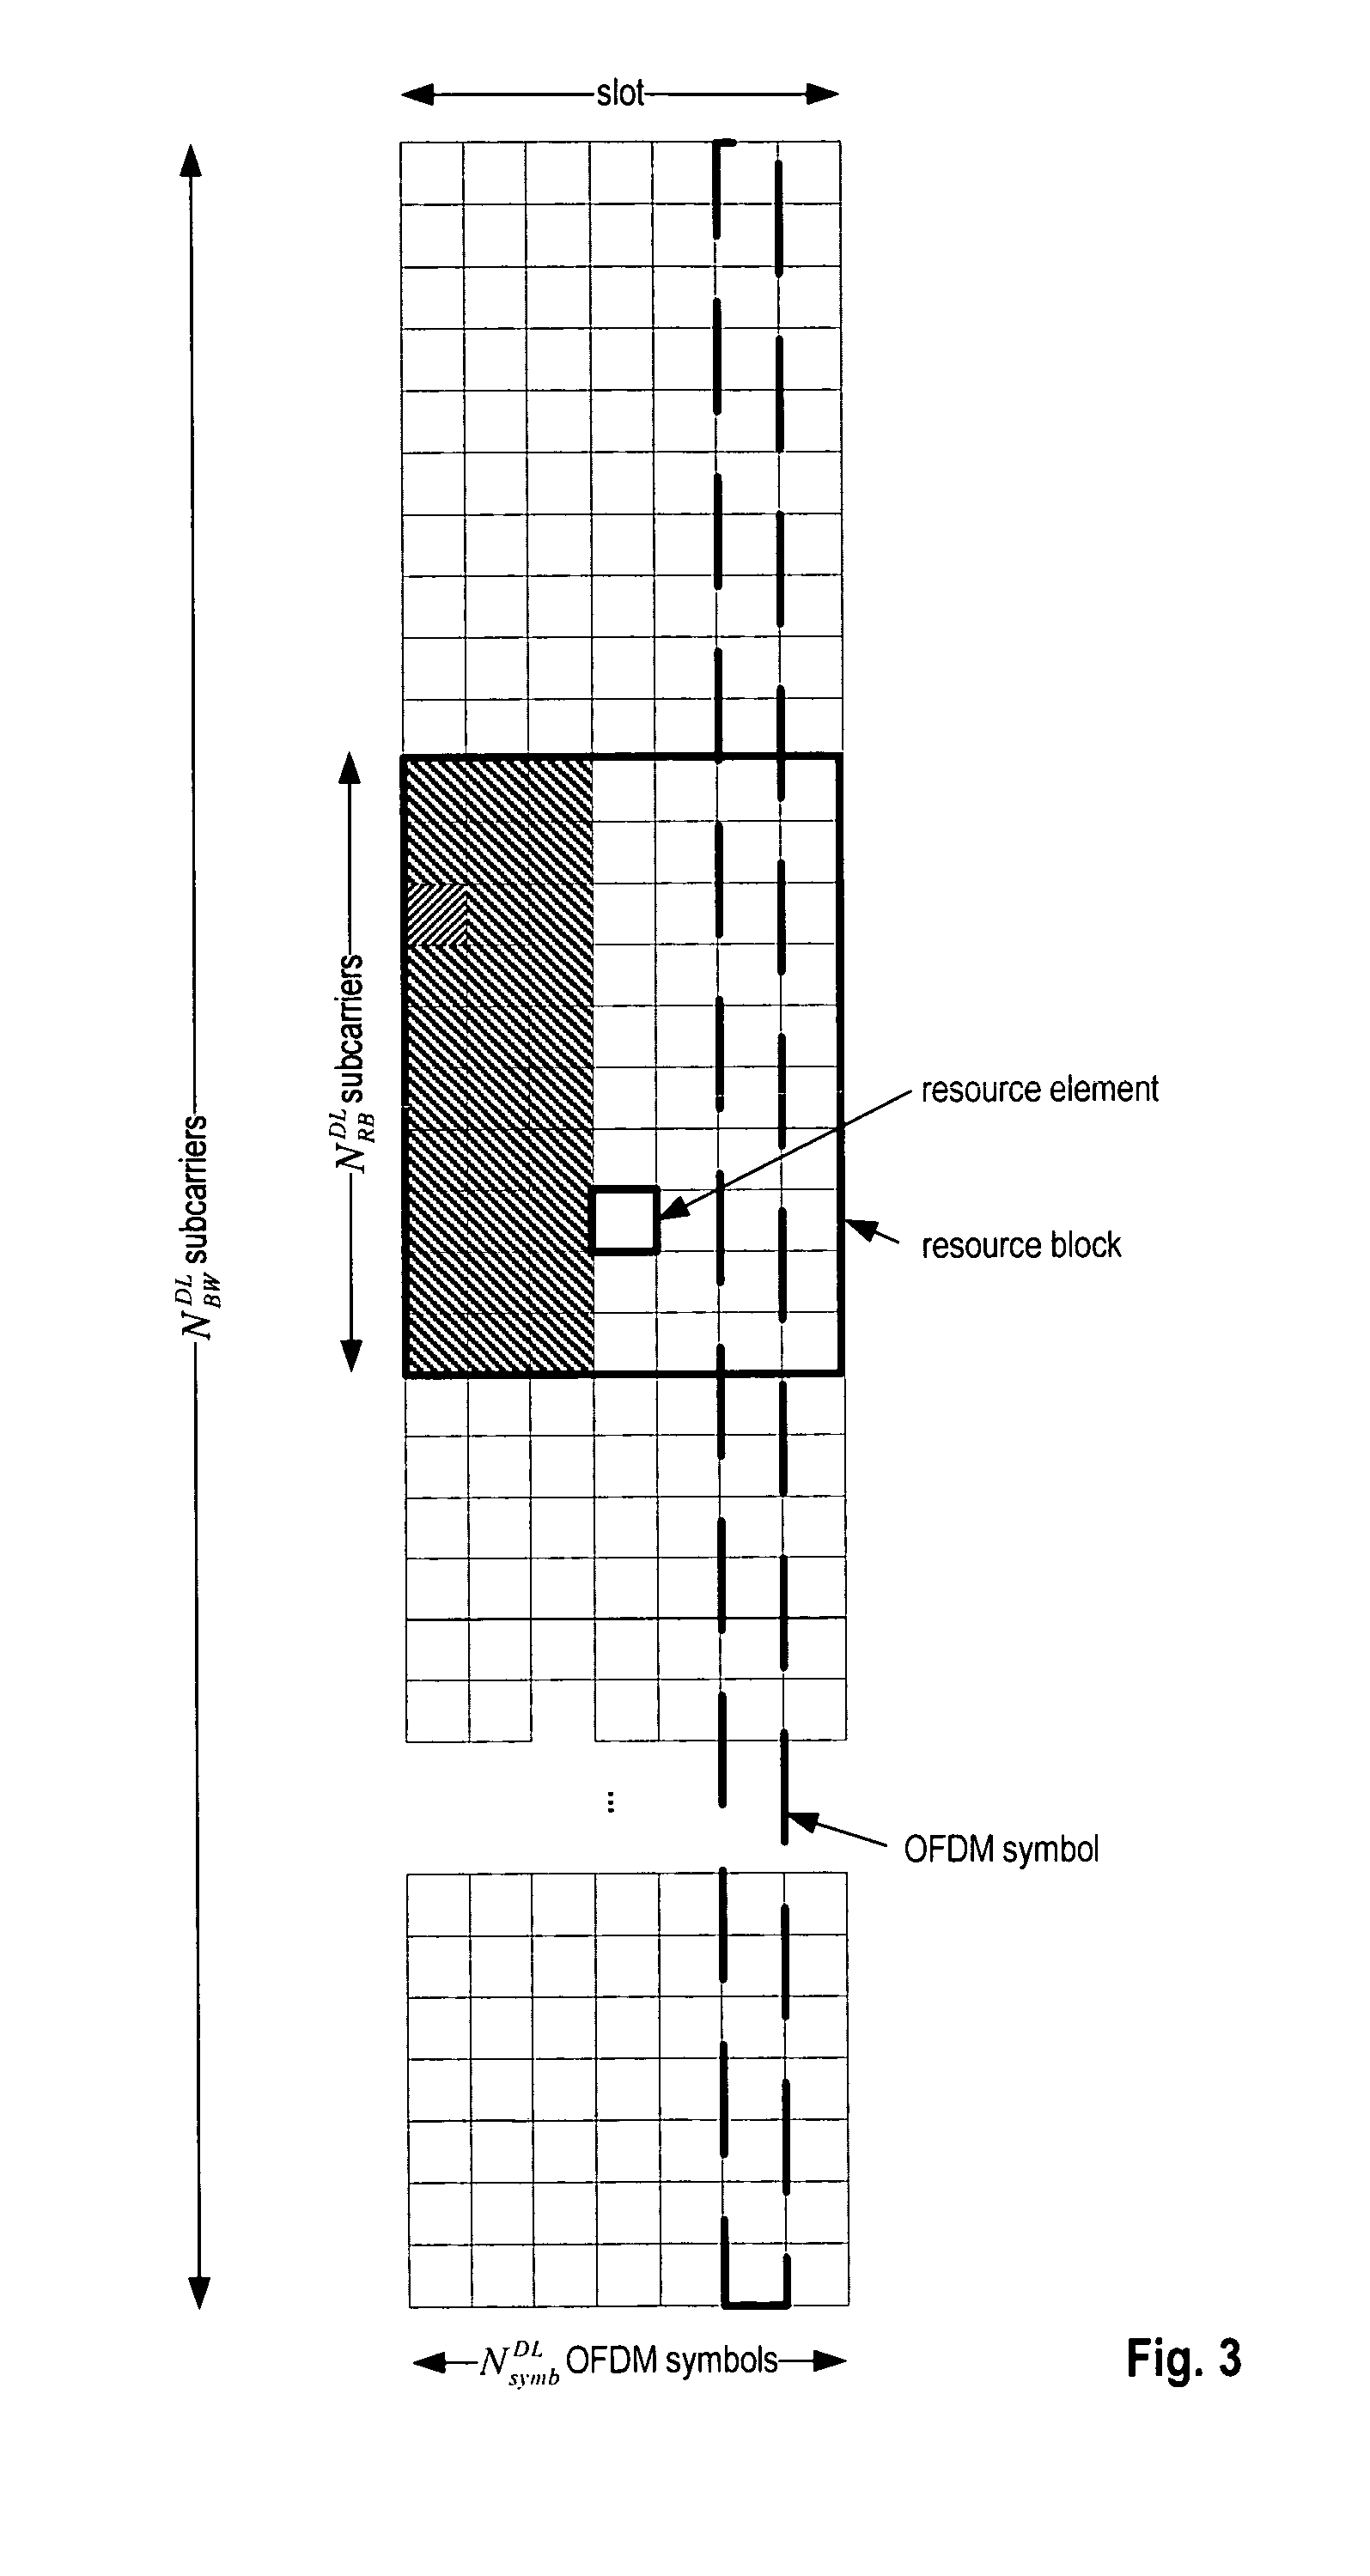 Configuration of control channels in a mobile communication system